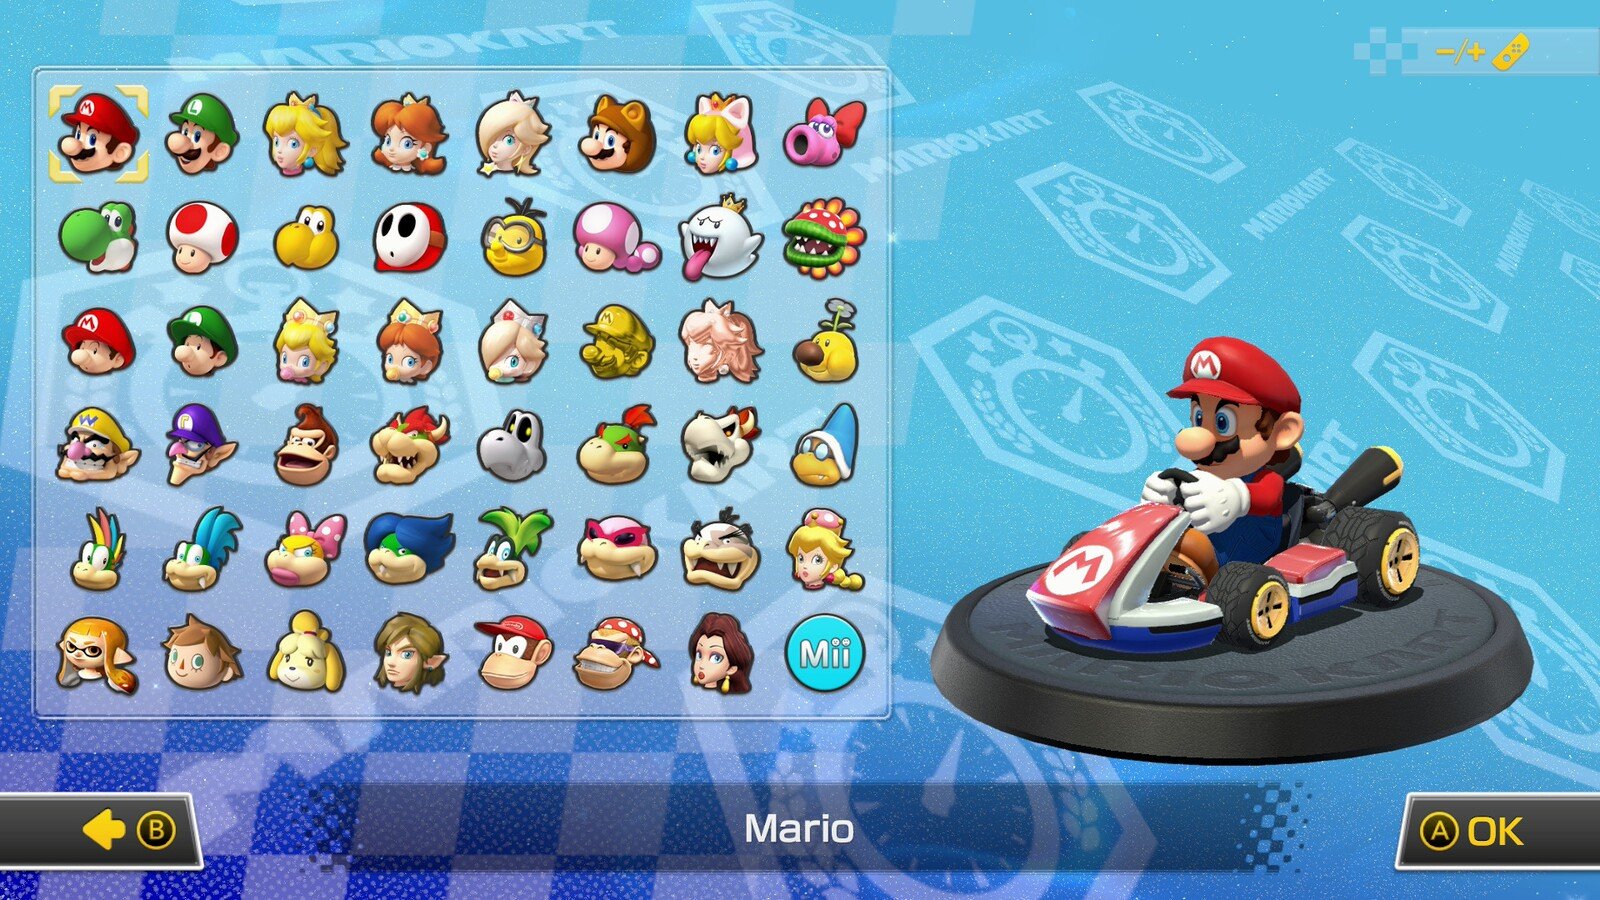 Character select screen with Gold Mario unlocked and all DLC characters downloaded